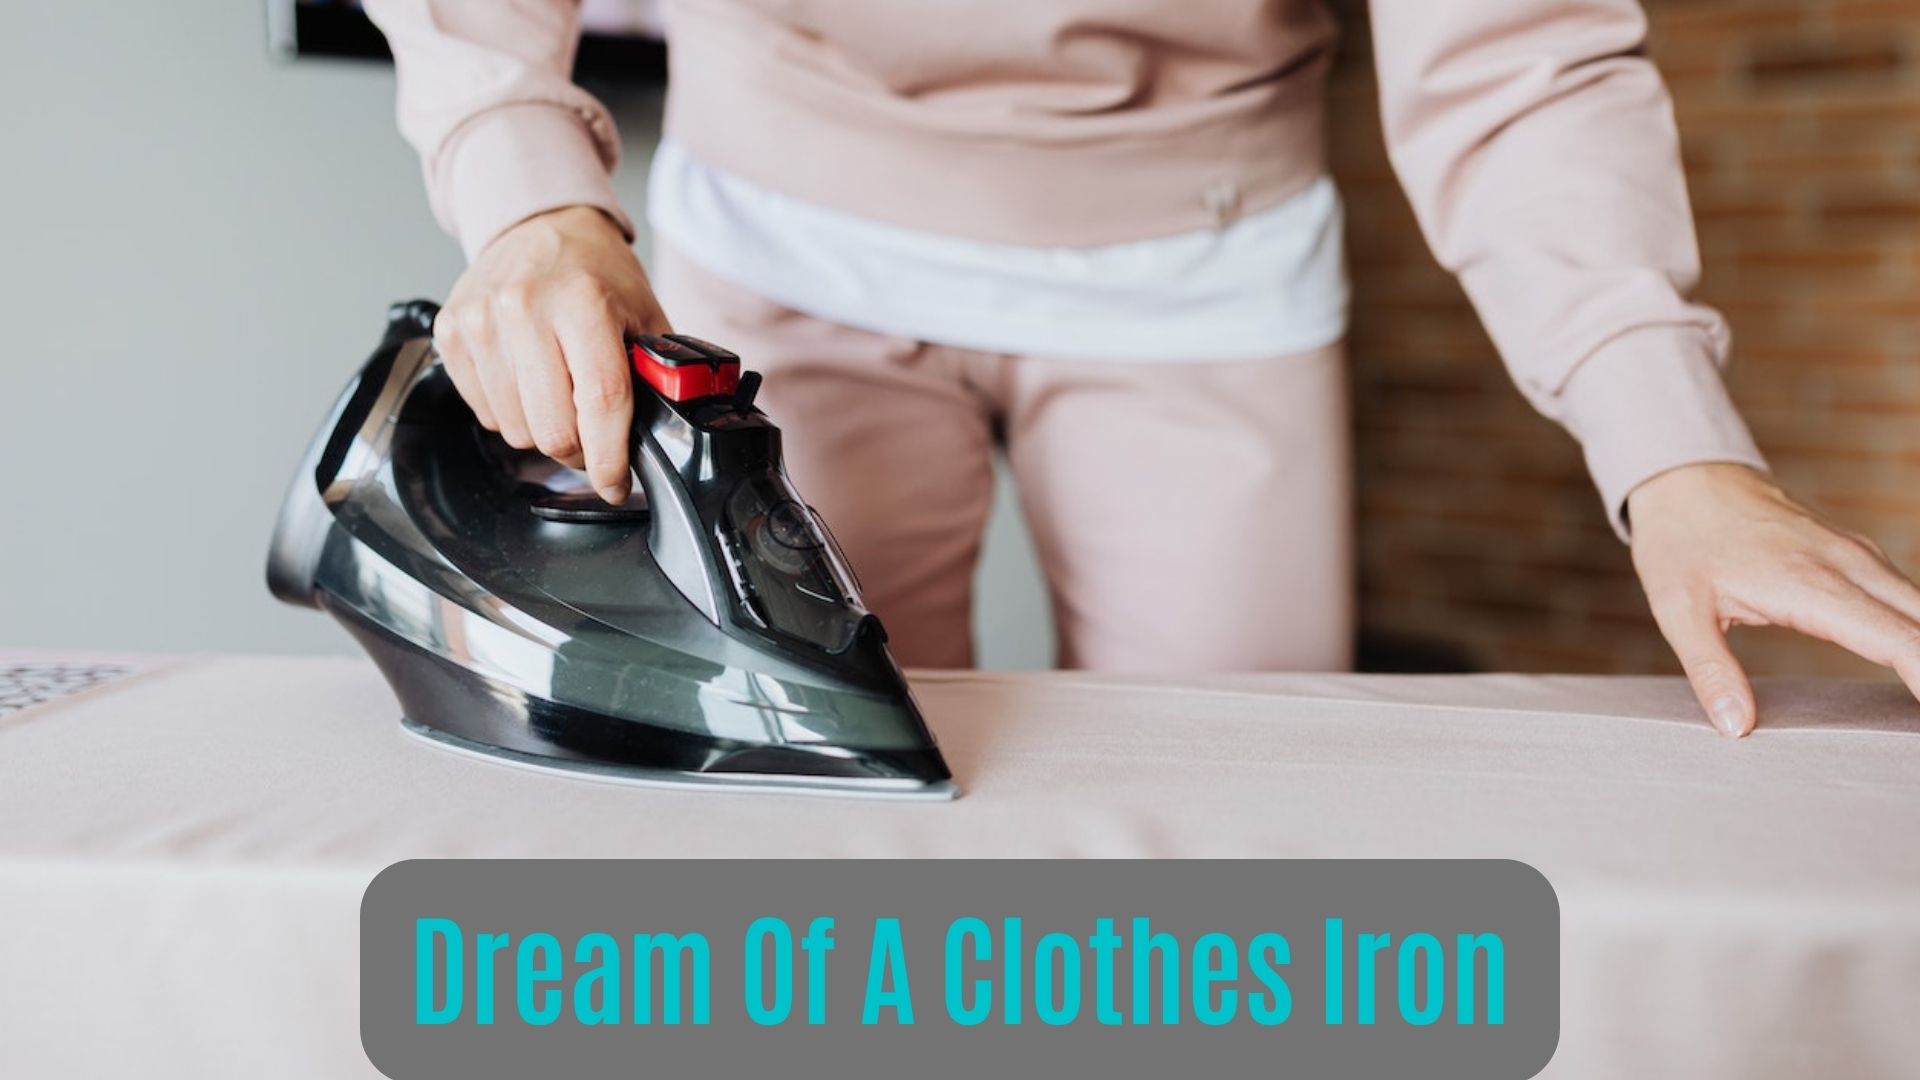 Dream Of A Clothes Iron - Denotes Power And Control